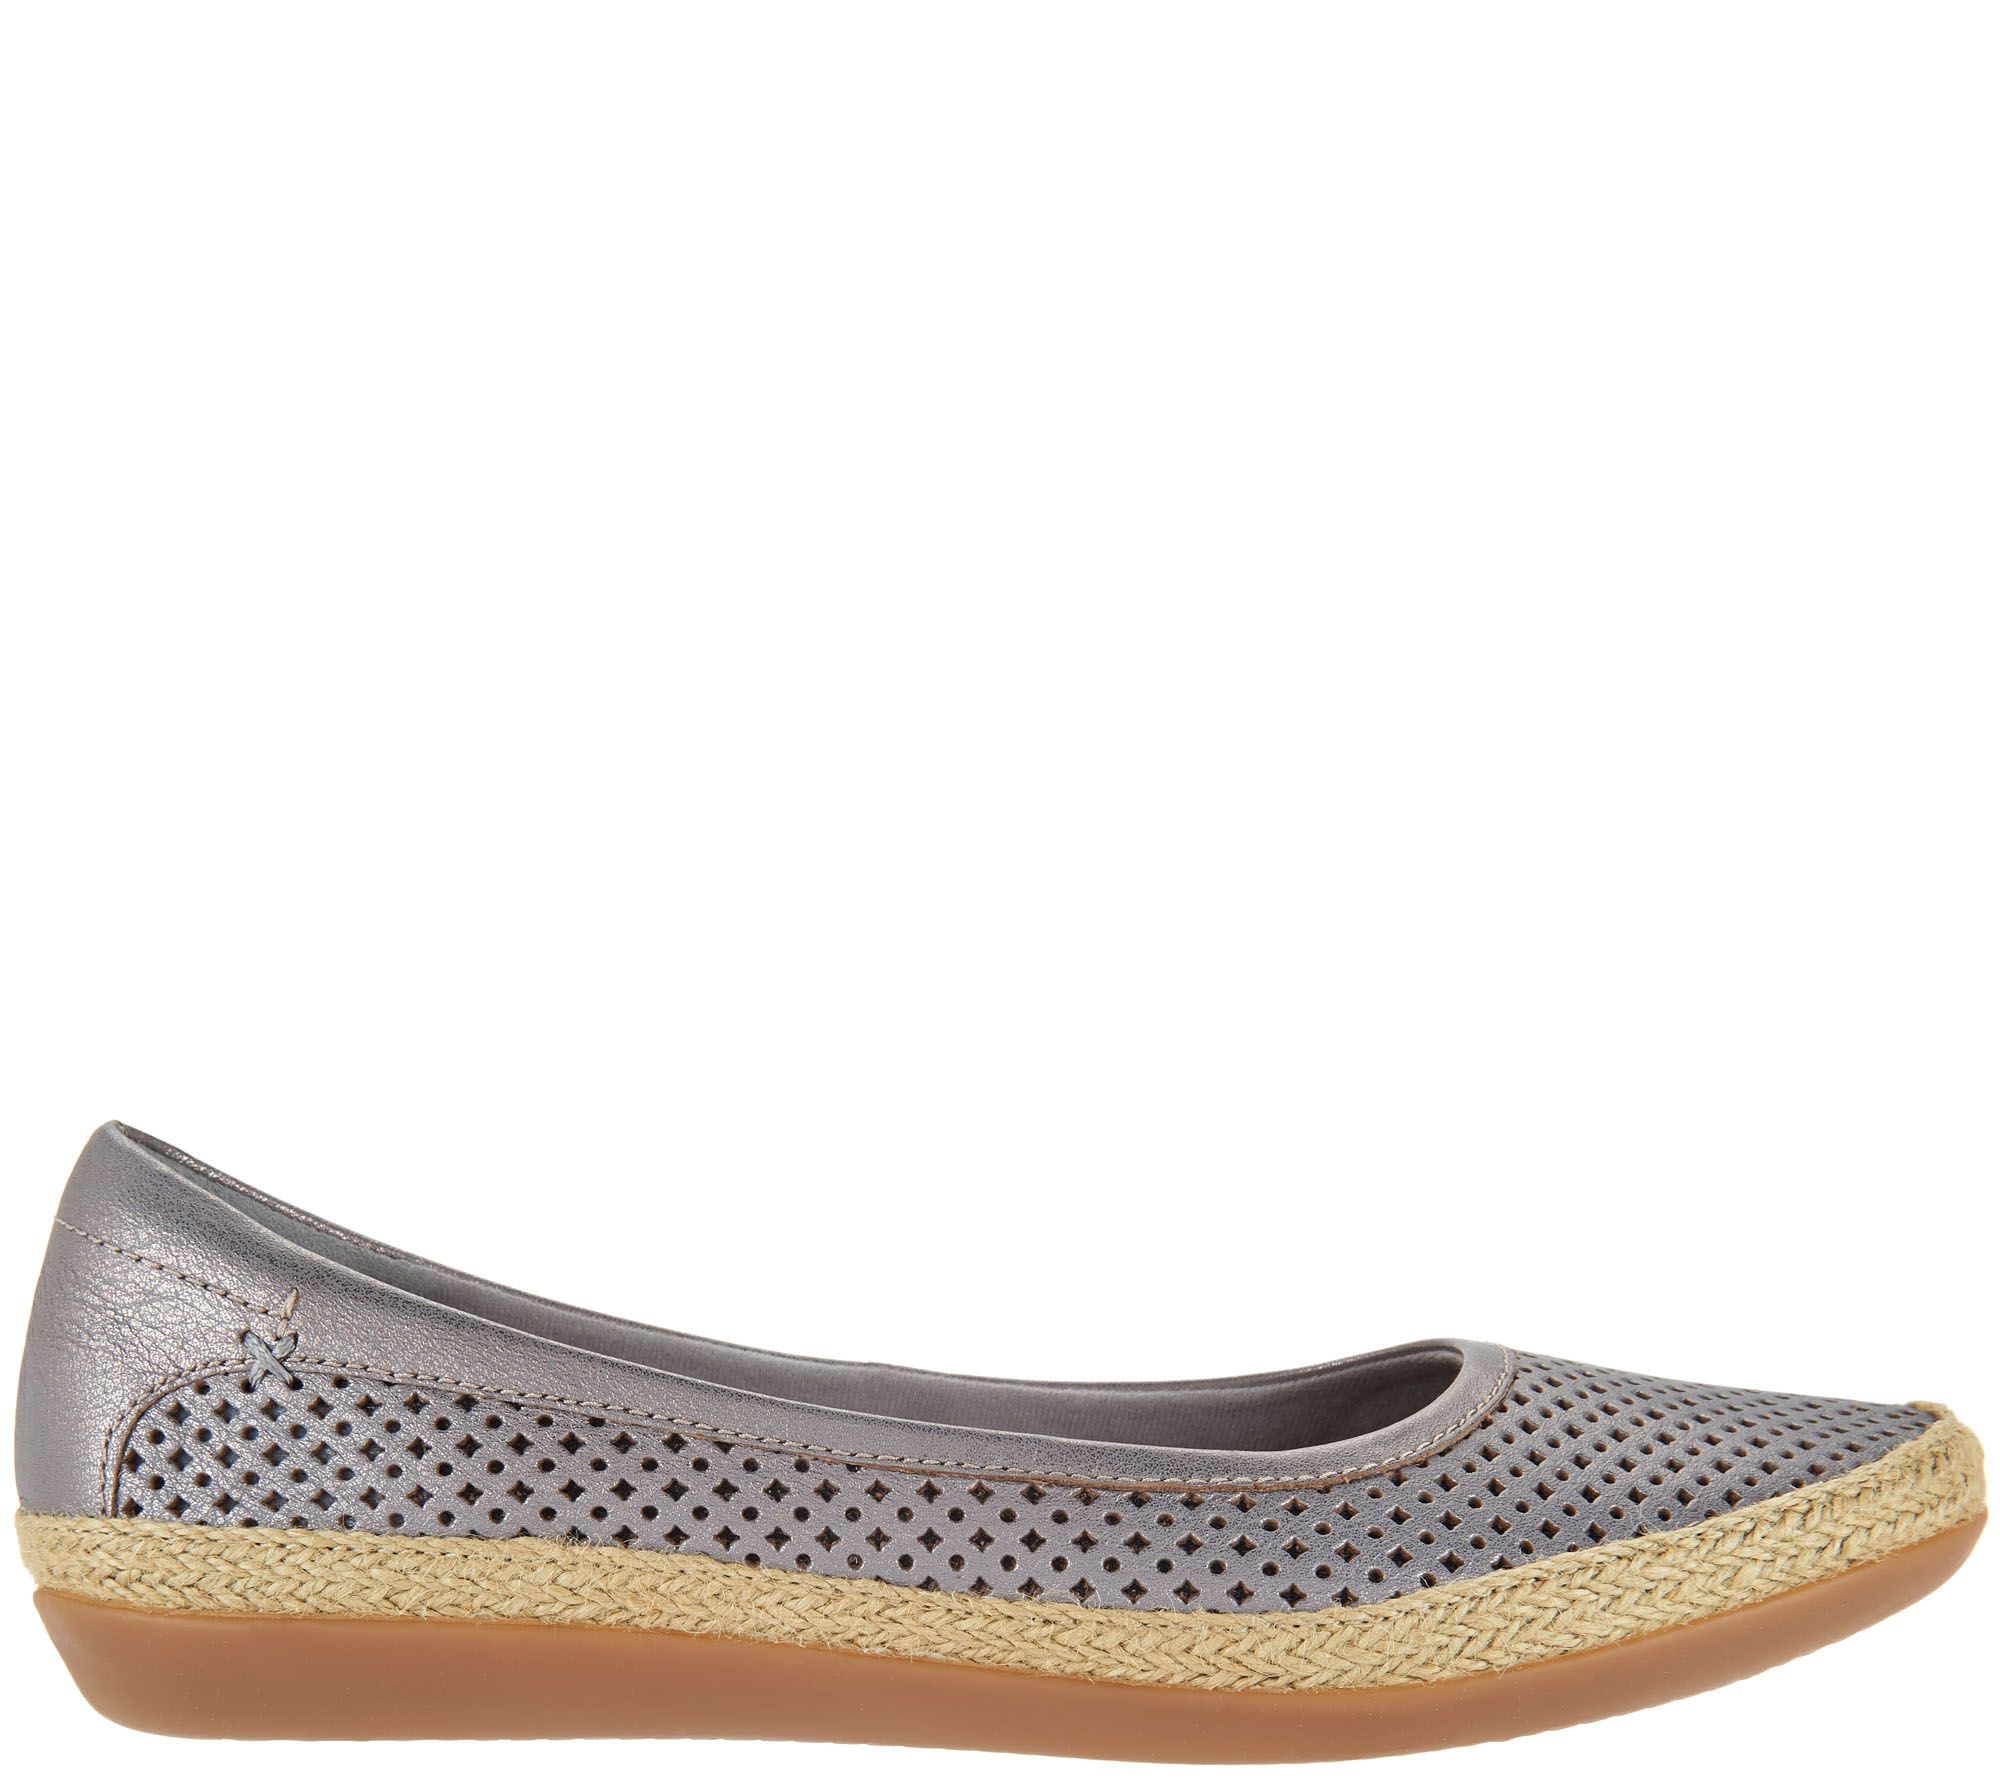 Clarks Collection Leather Espadrilles - Danelly Adira - QVC.com